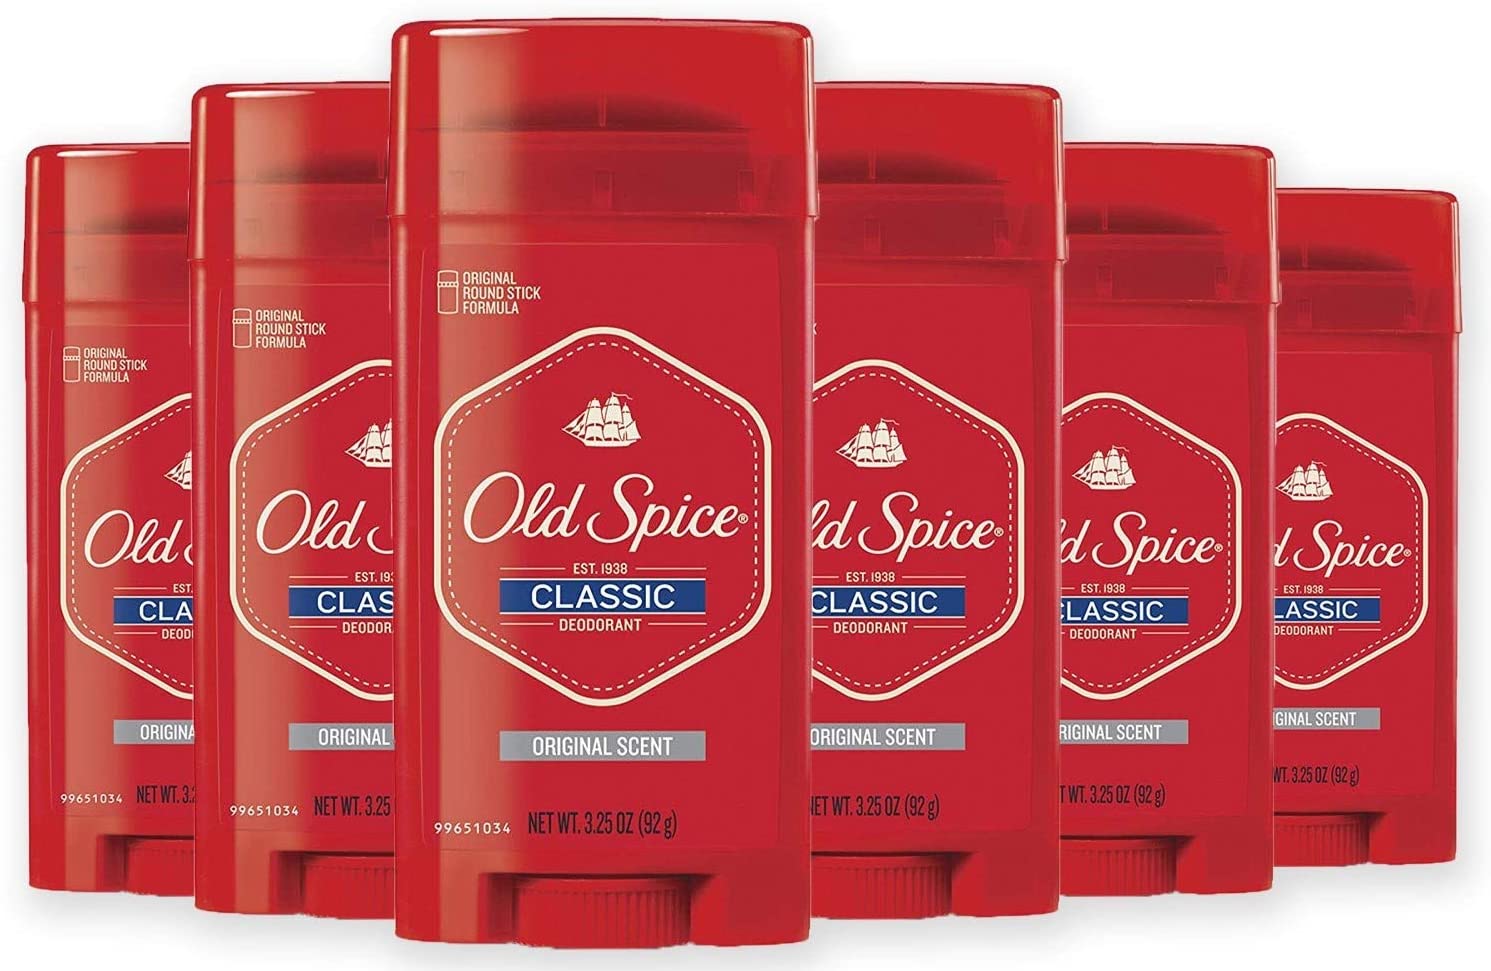 Old Spice Classic Deodorant Stick (Pack of 6) $9.93 w/ 15% S&S or $11.53 w/ 5% S&S